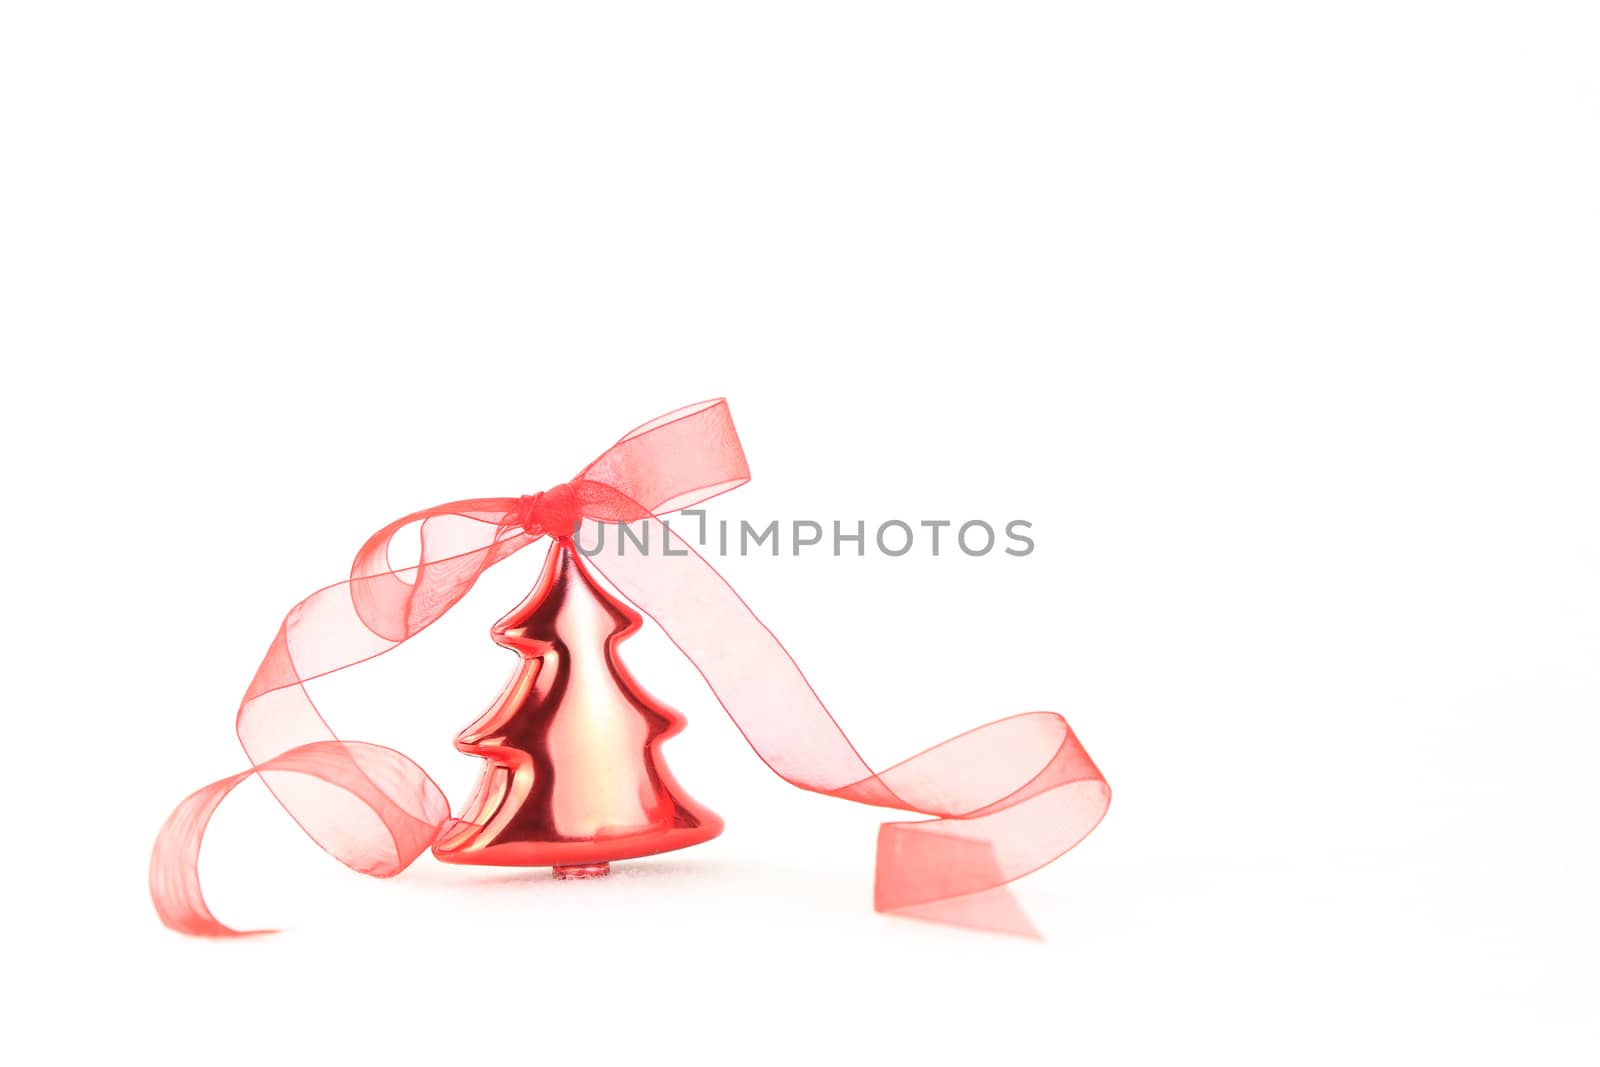 Isolated red Christmas tree bauble with red organza ribbon on white background by robbyfontanesi